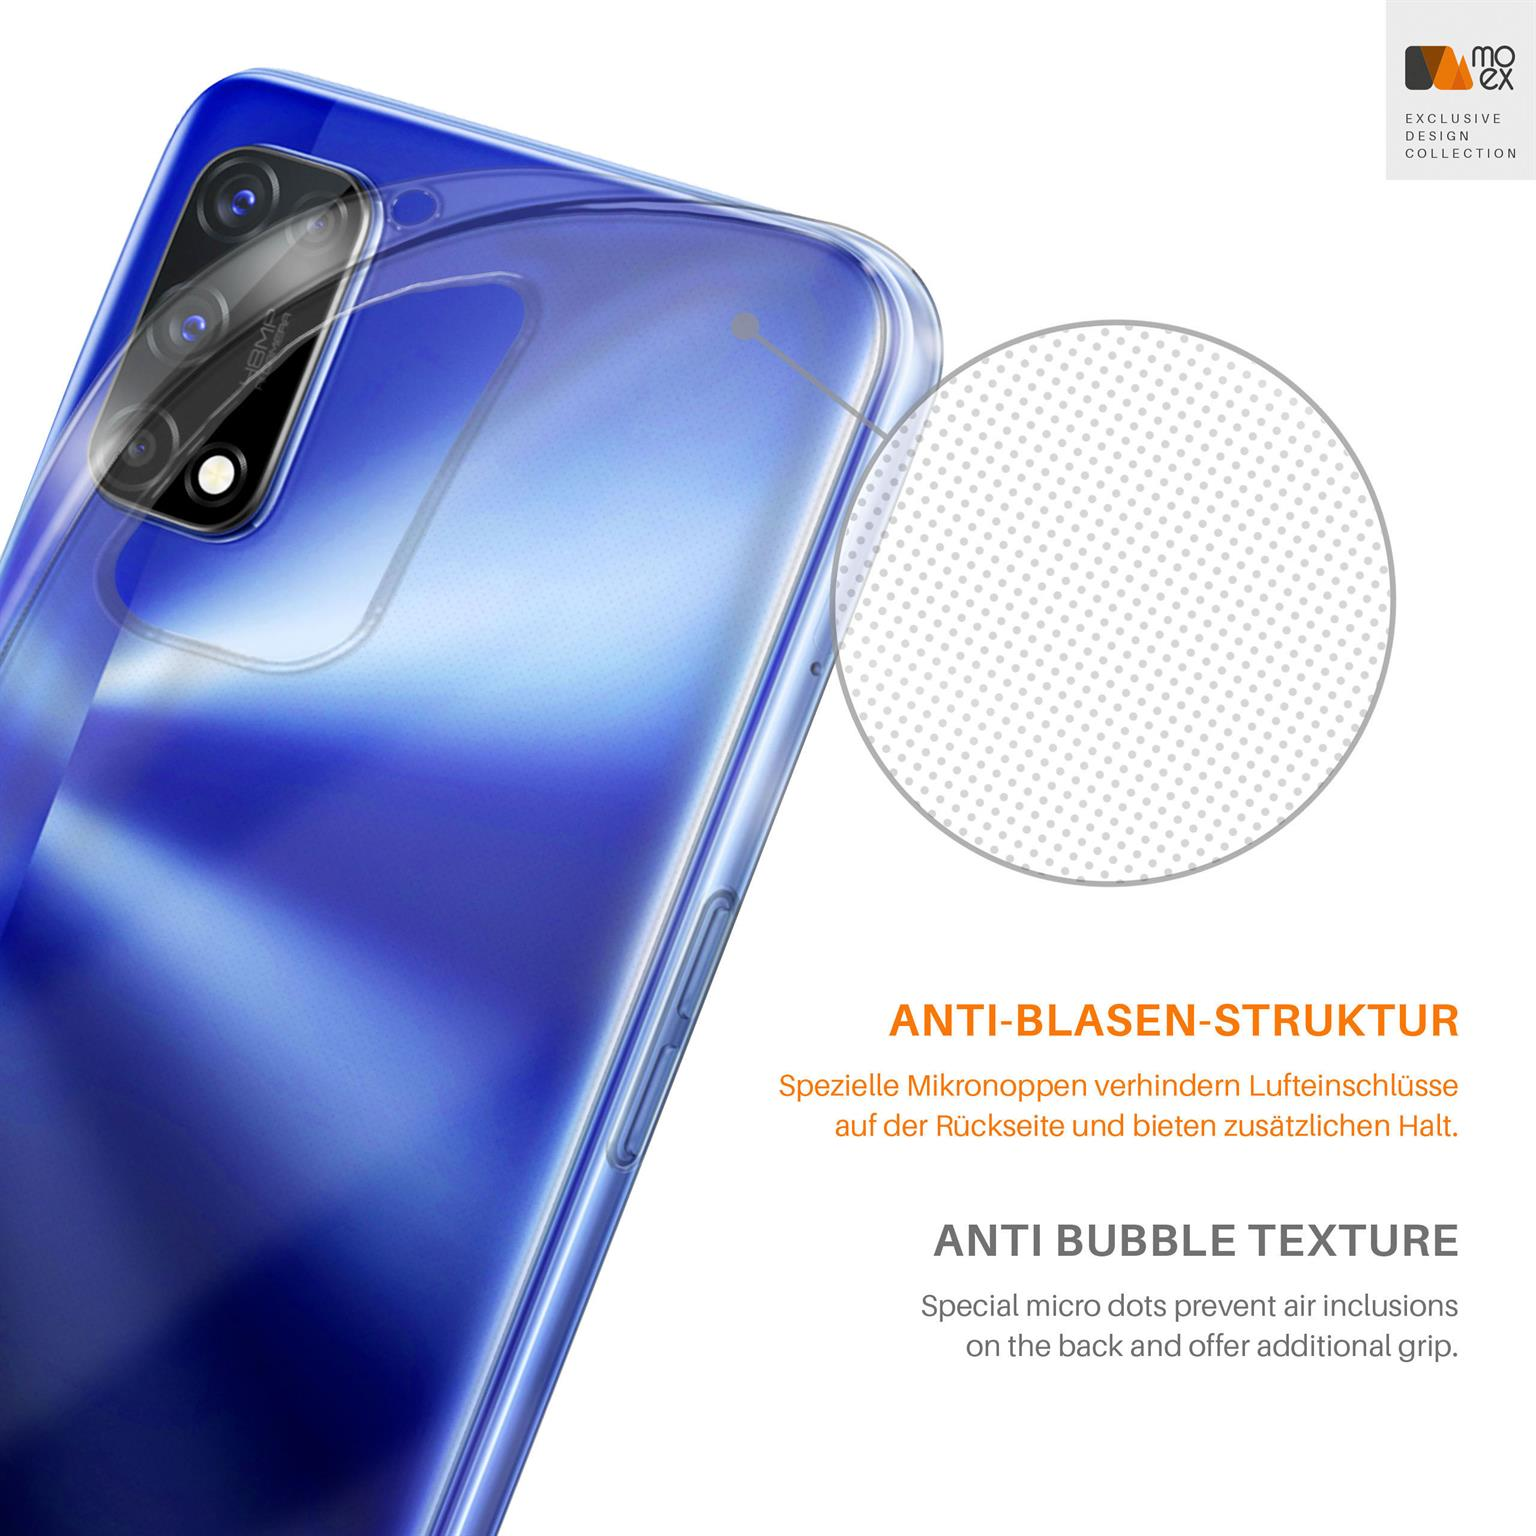 Backcover, MOEX Realme, Crystal-Clear Aero Pro, Case, 7